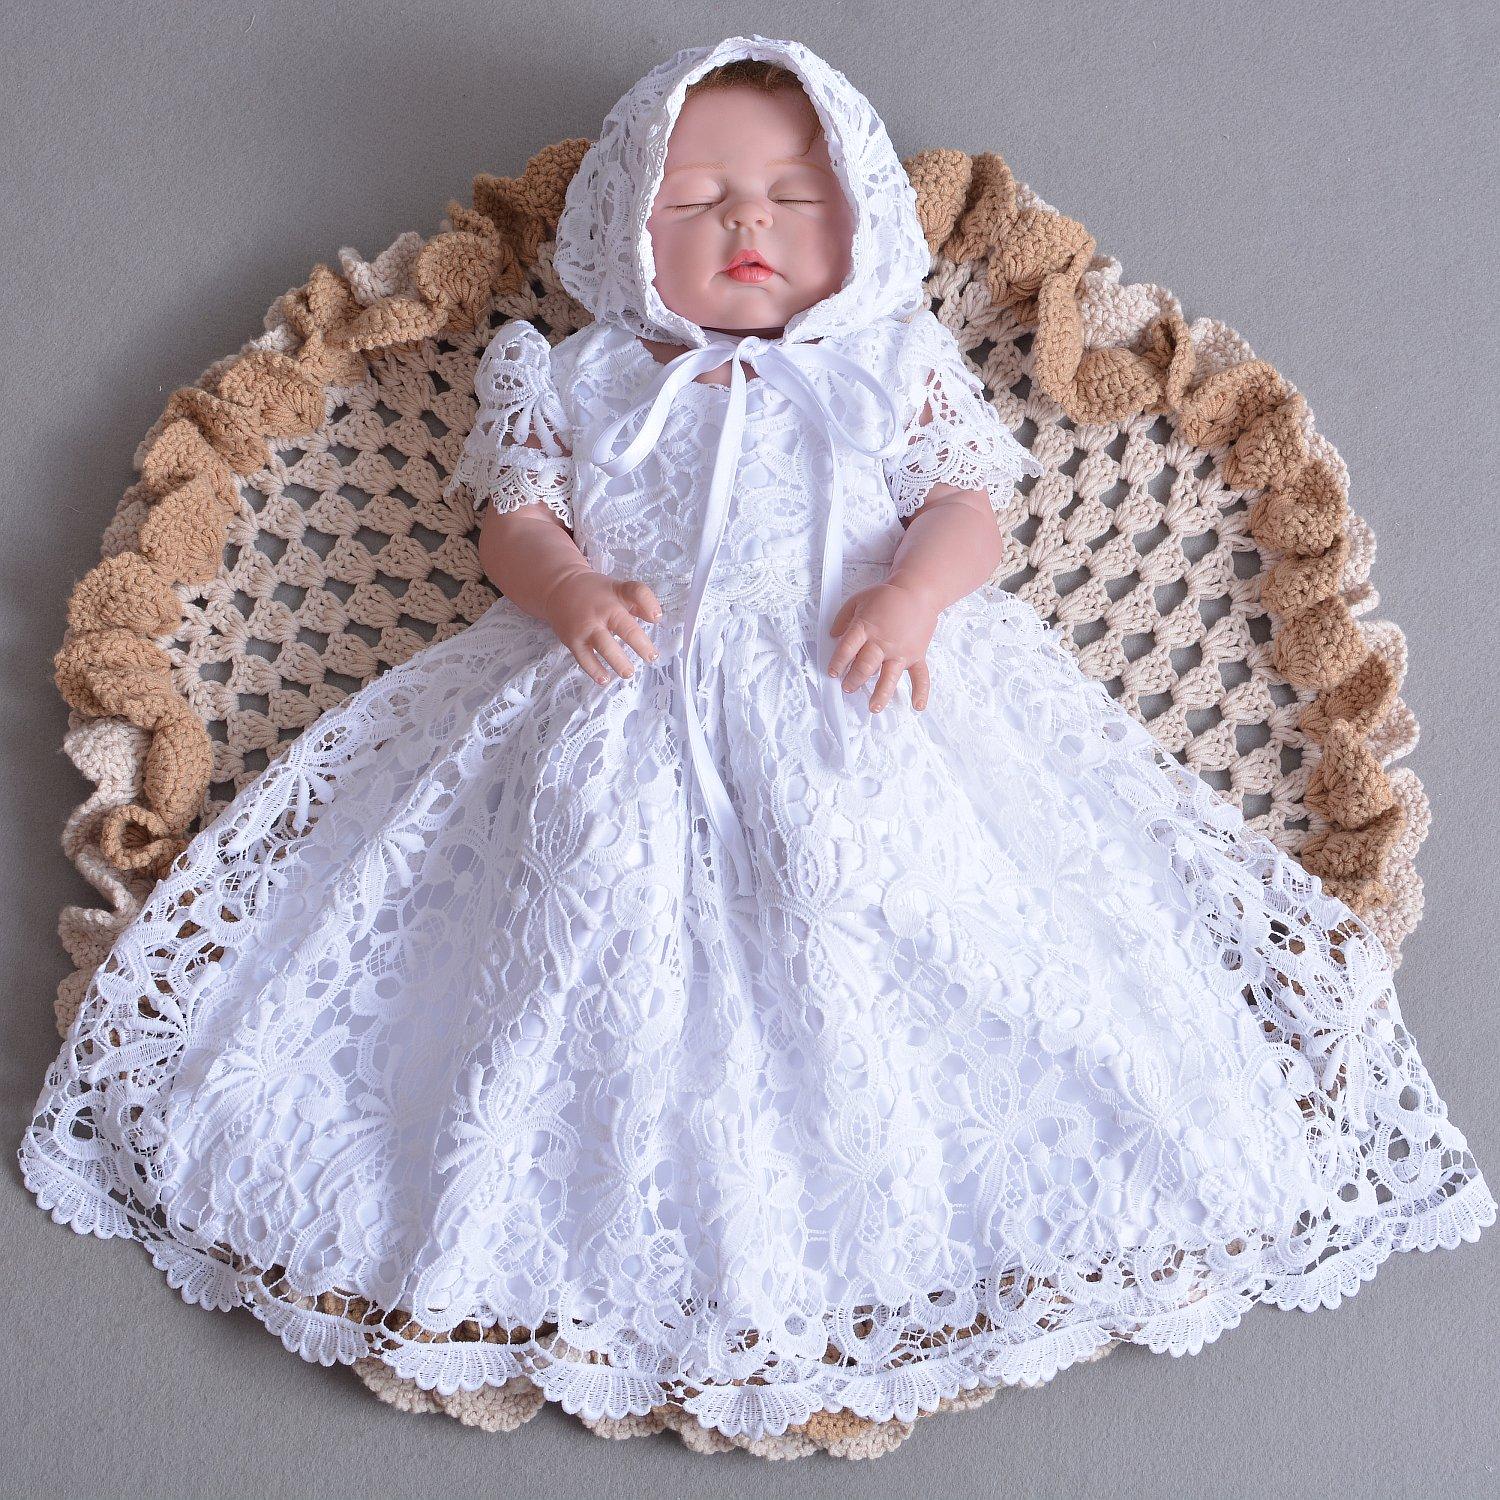 Cotton Victorian Vintage Christening Outfits for Children for sale | eBay